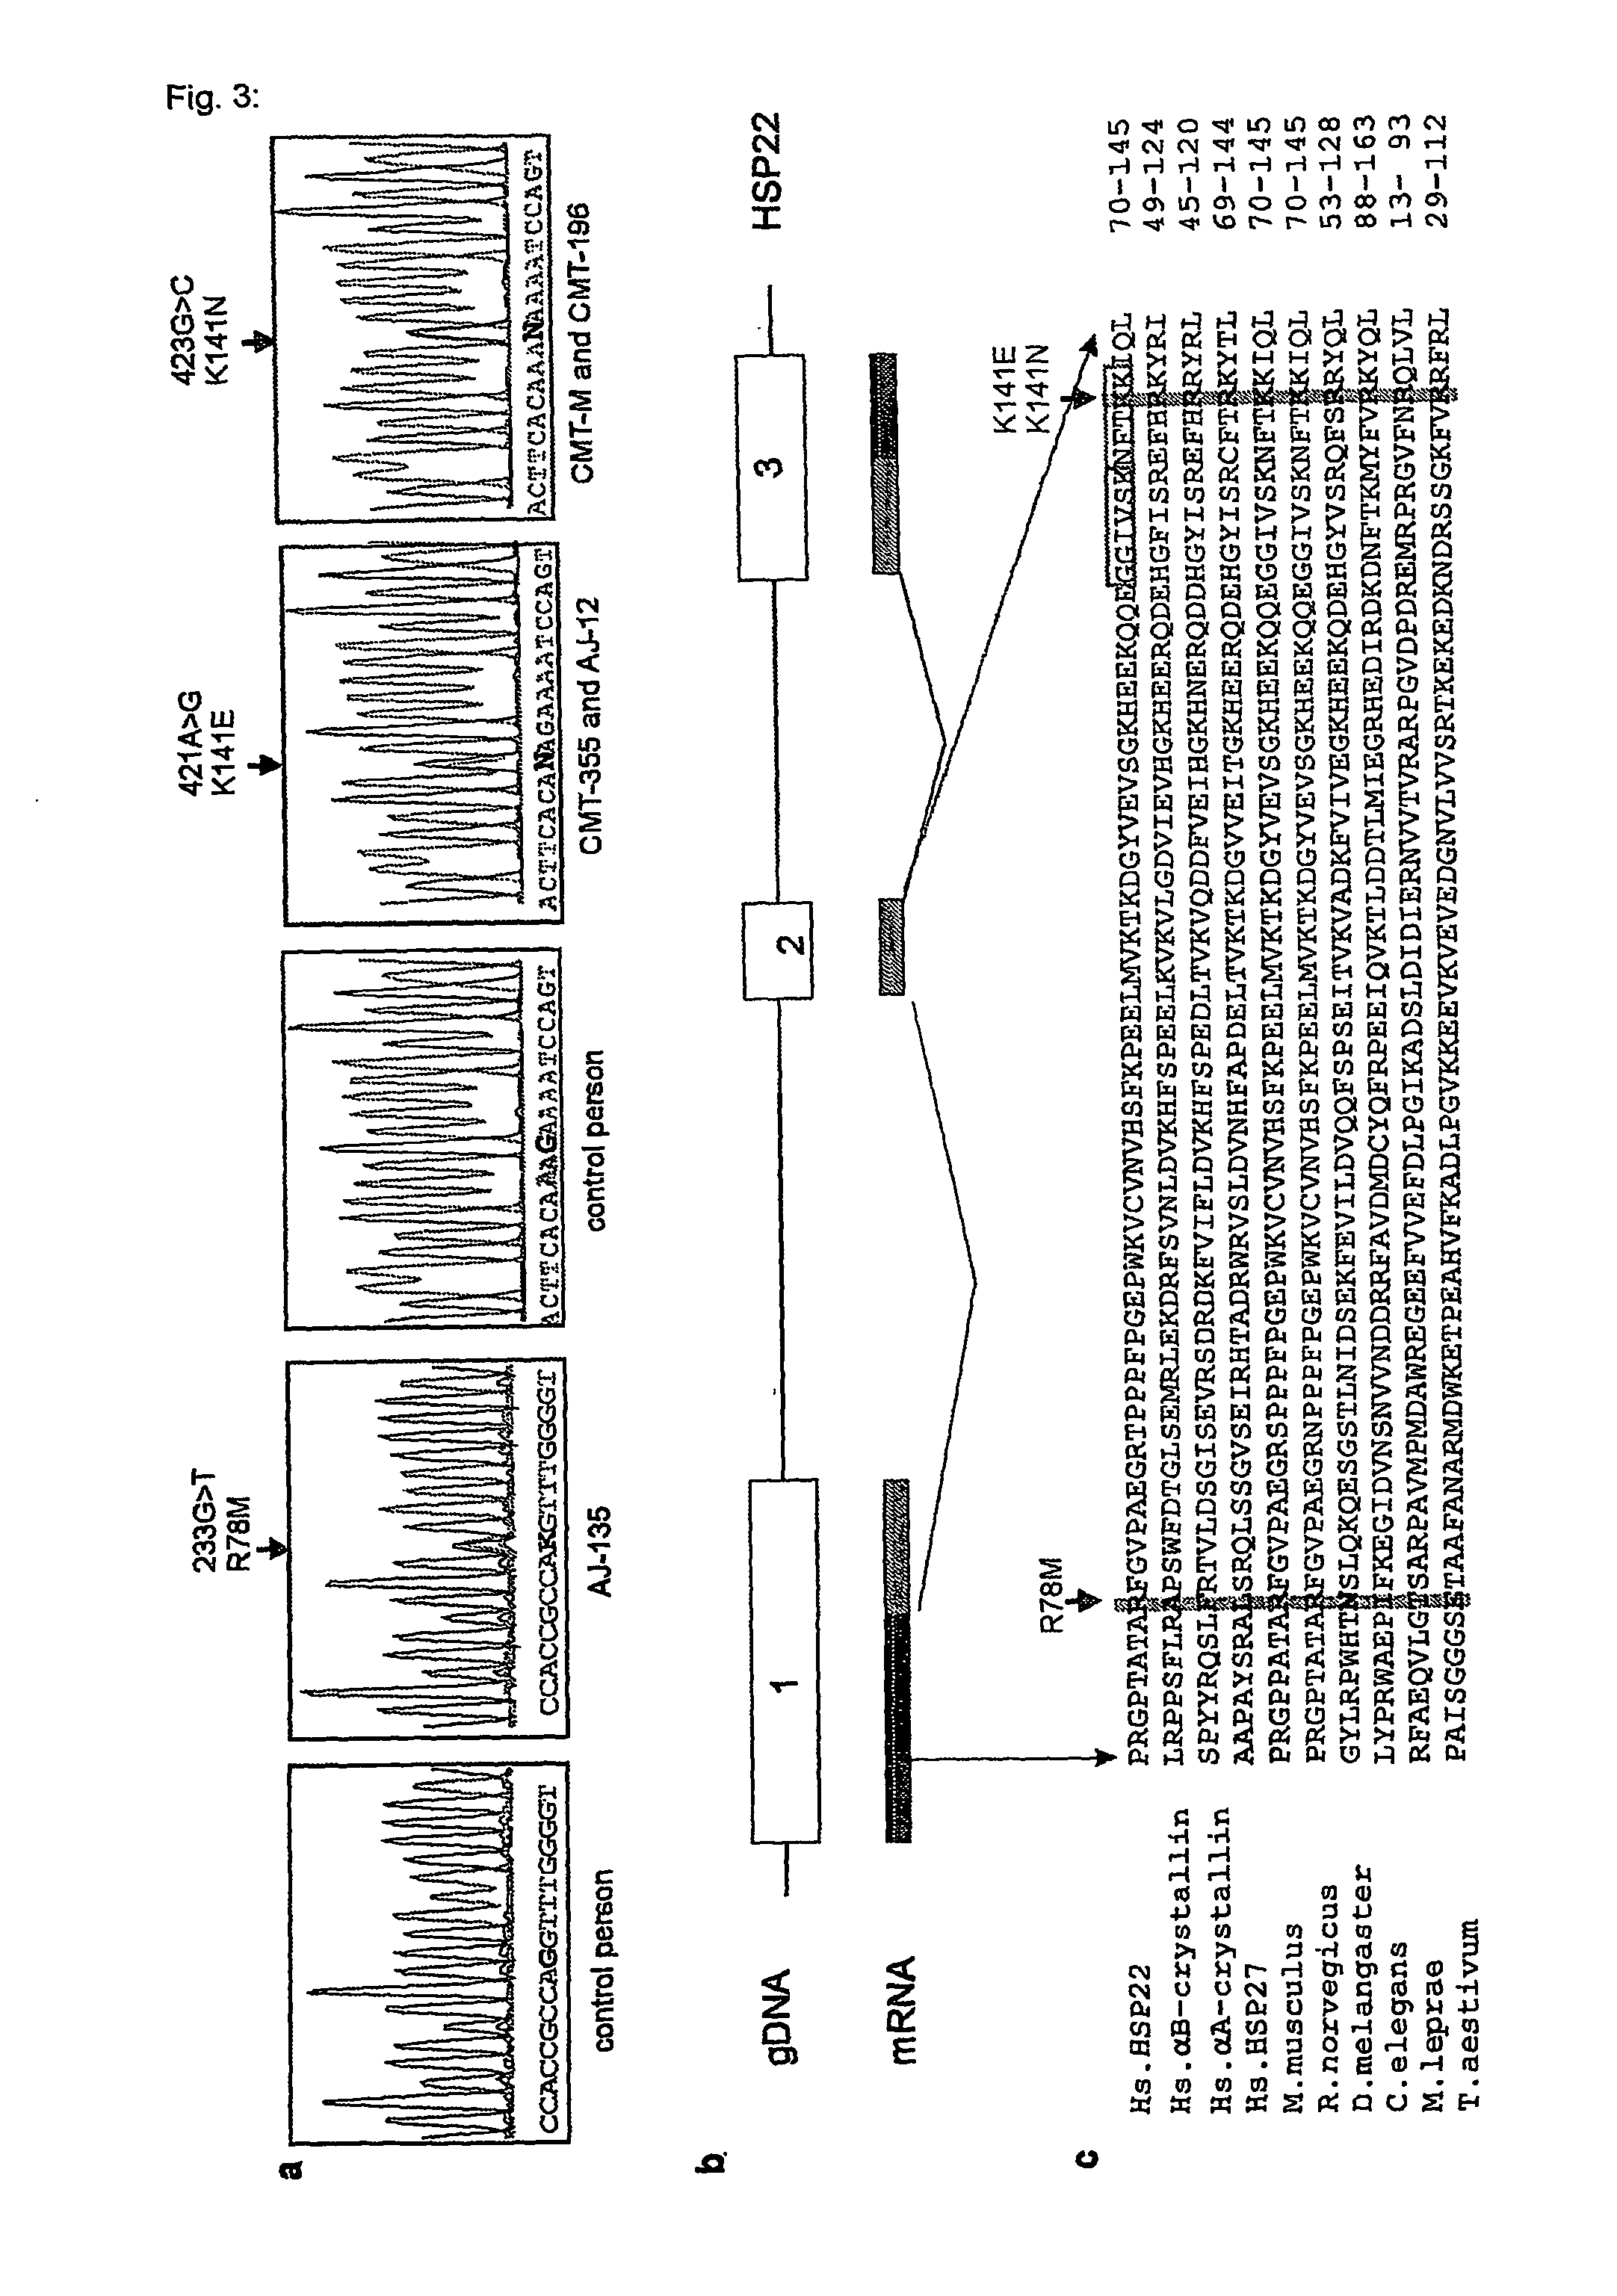 Diagnostic tests for the detection of motor neuropathy